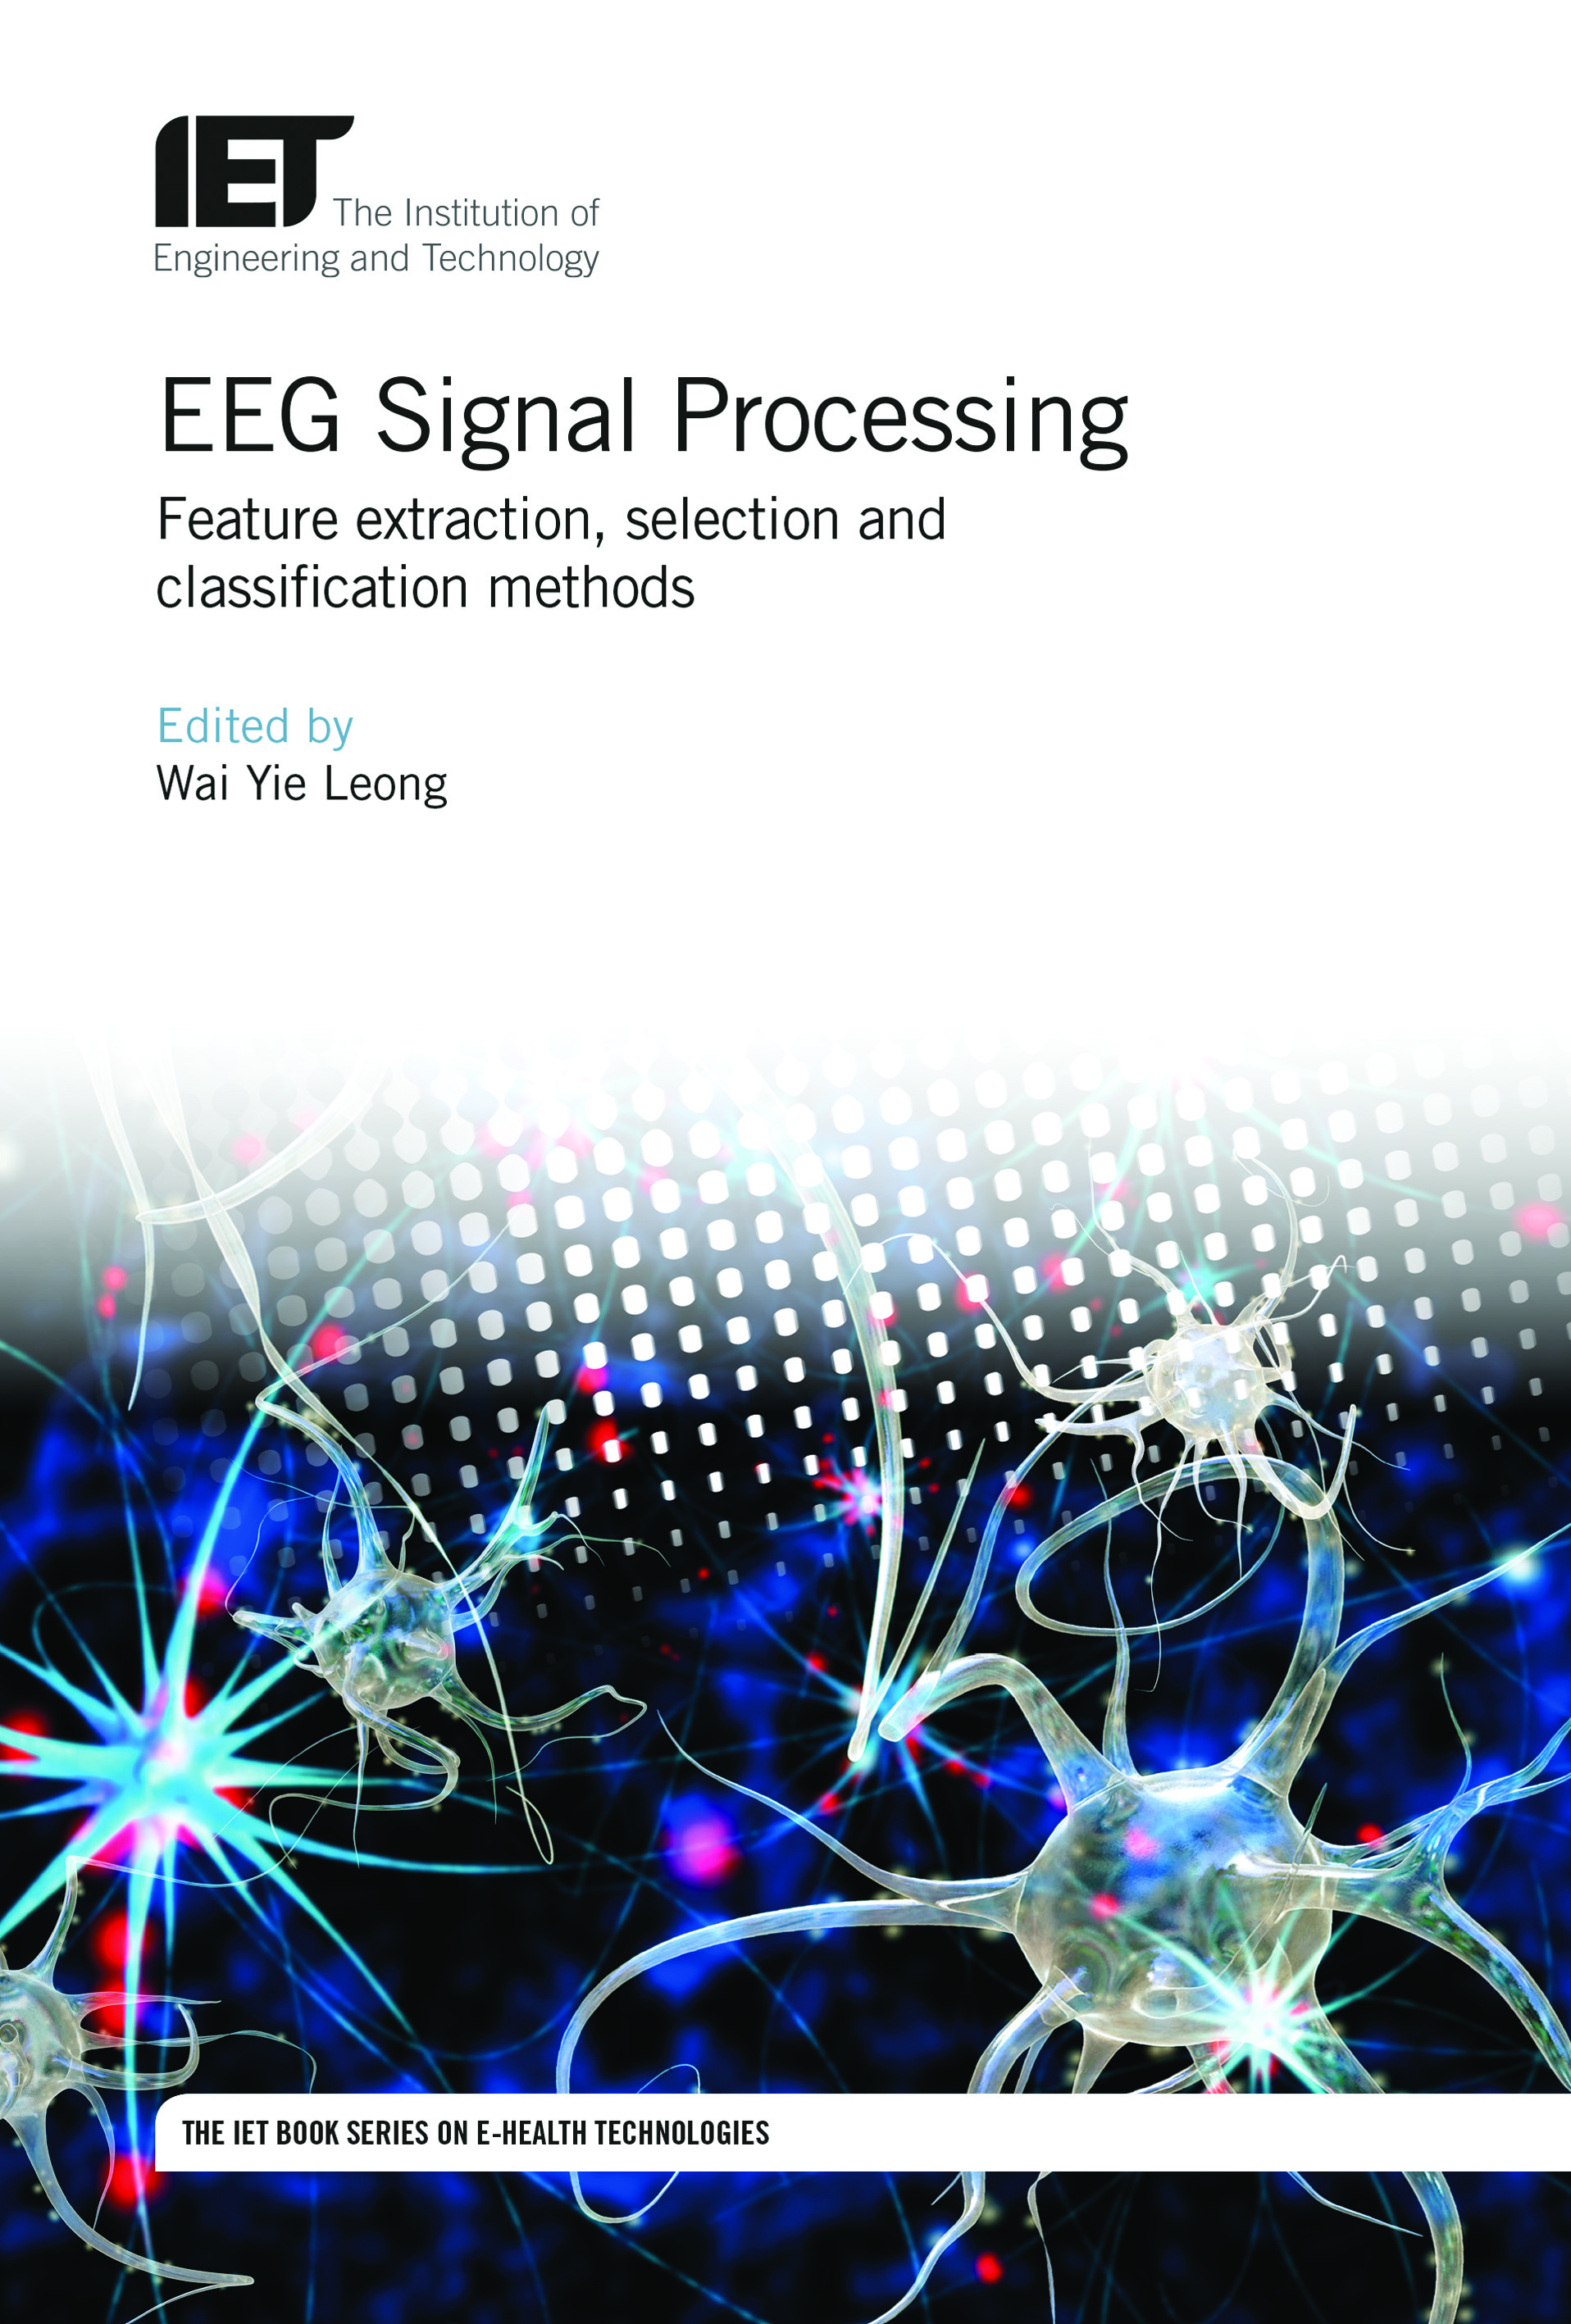 EEG Signal Processing, Feature extraction, selection and classification methods